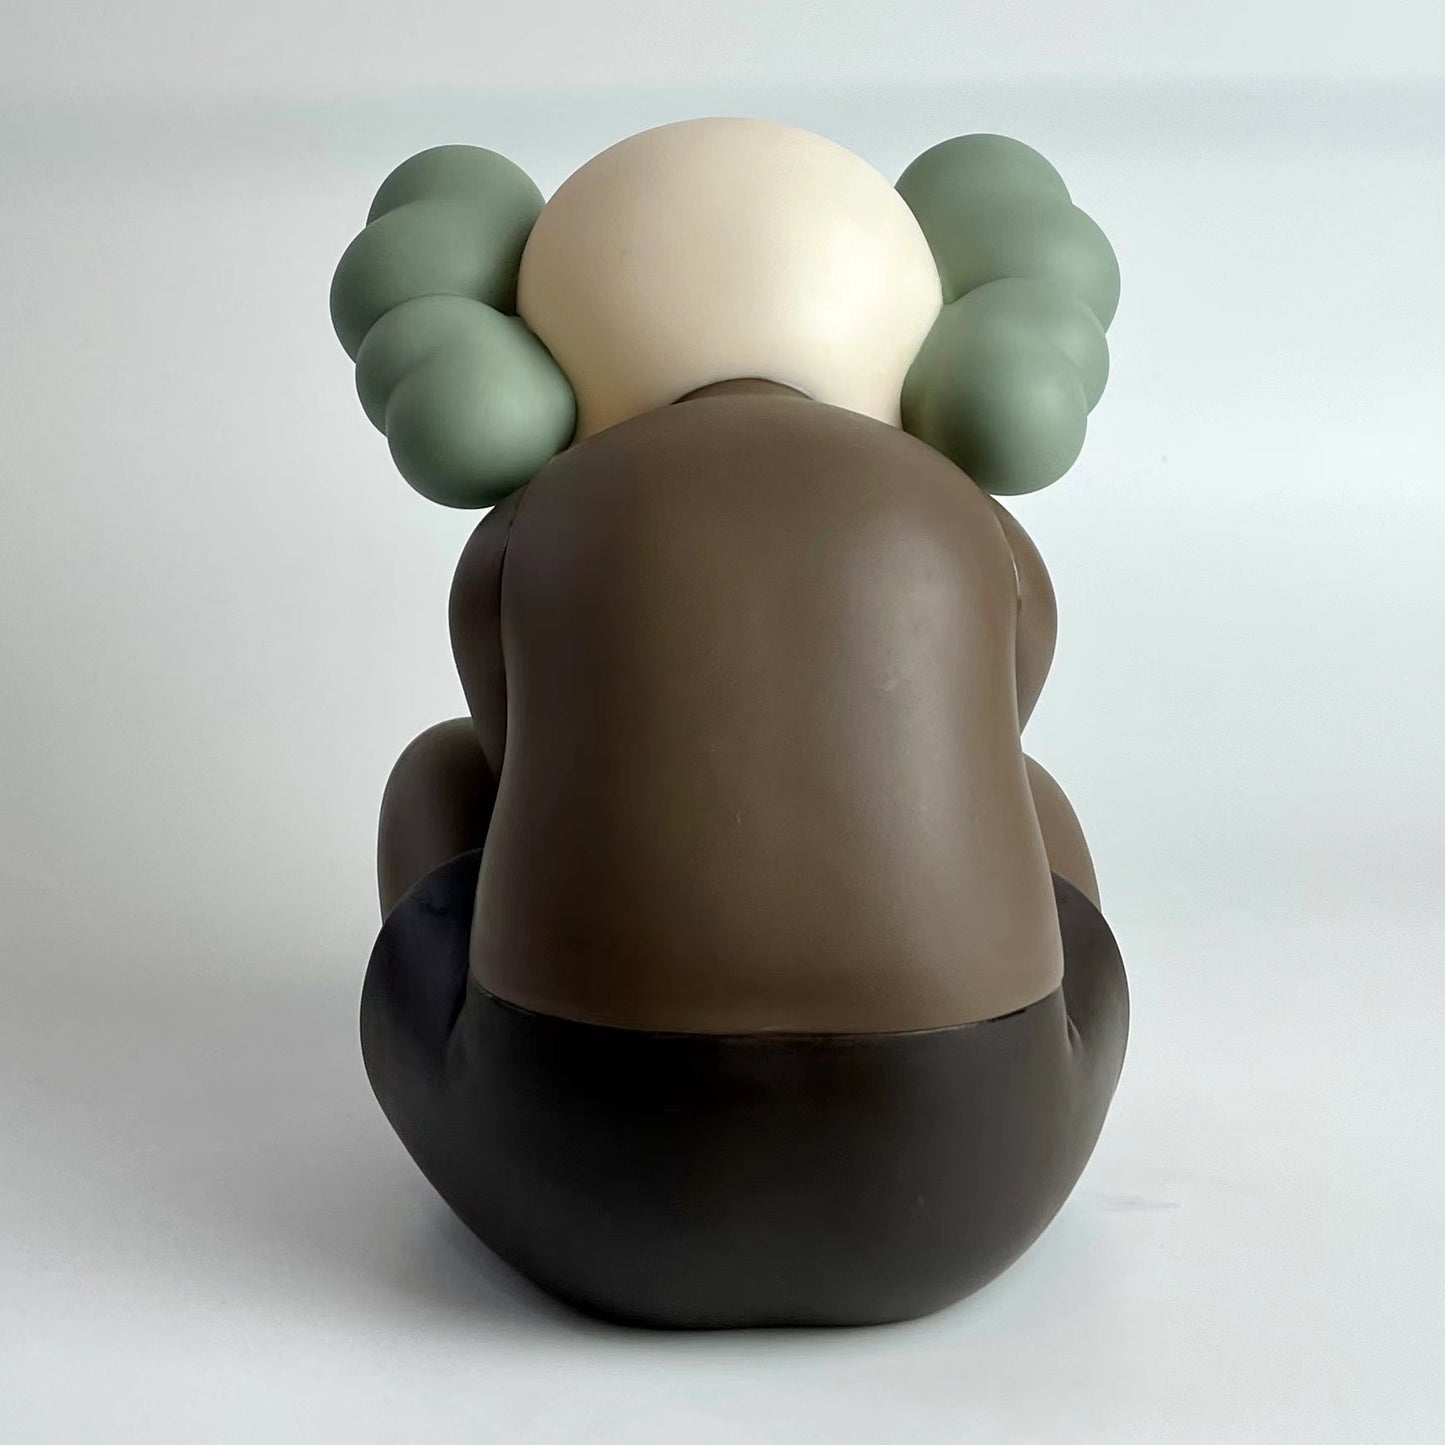 Hobby - Boxed Trendy KAWS Separate Companion Edition Action Figure 25cm